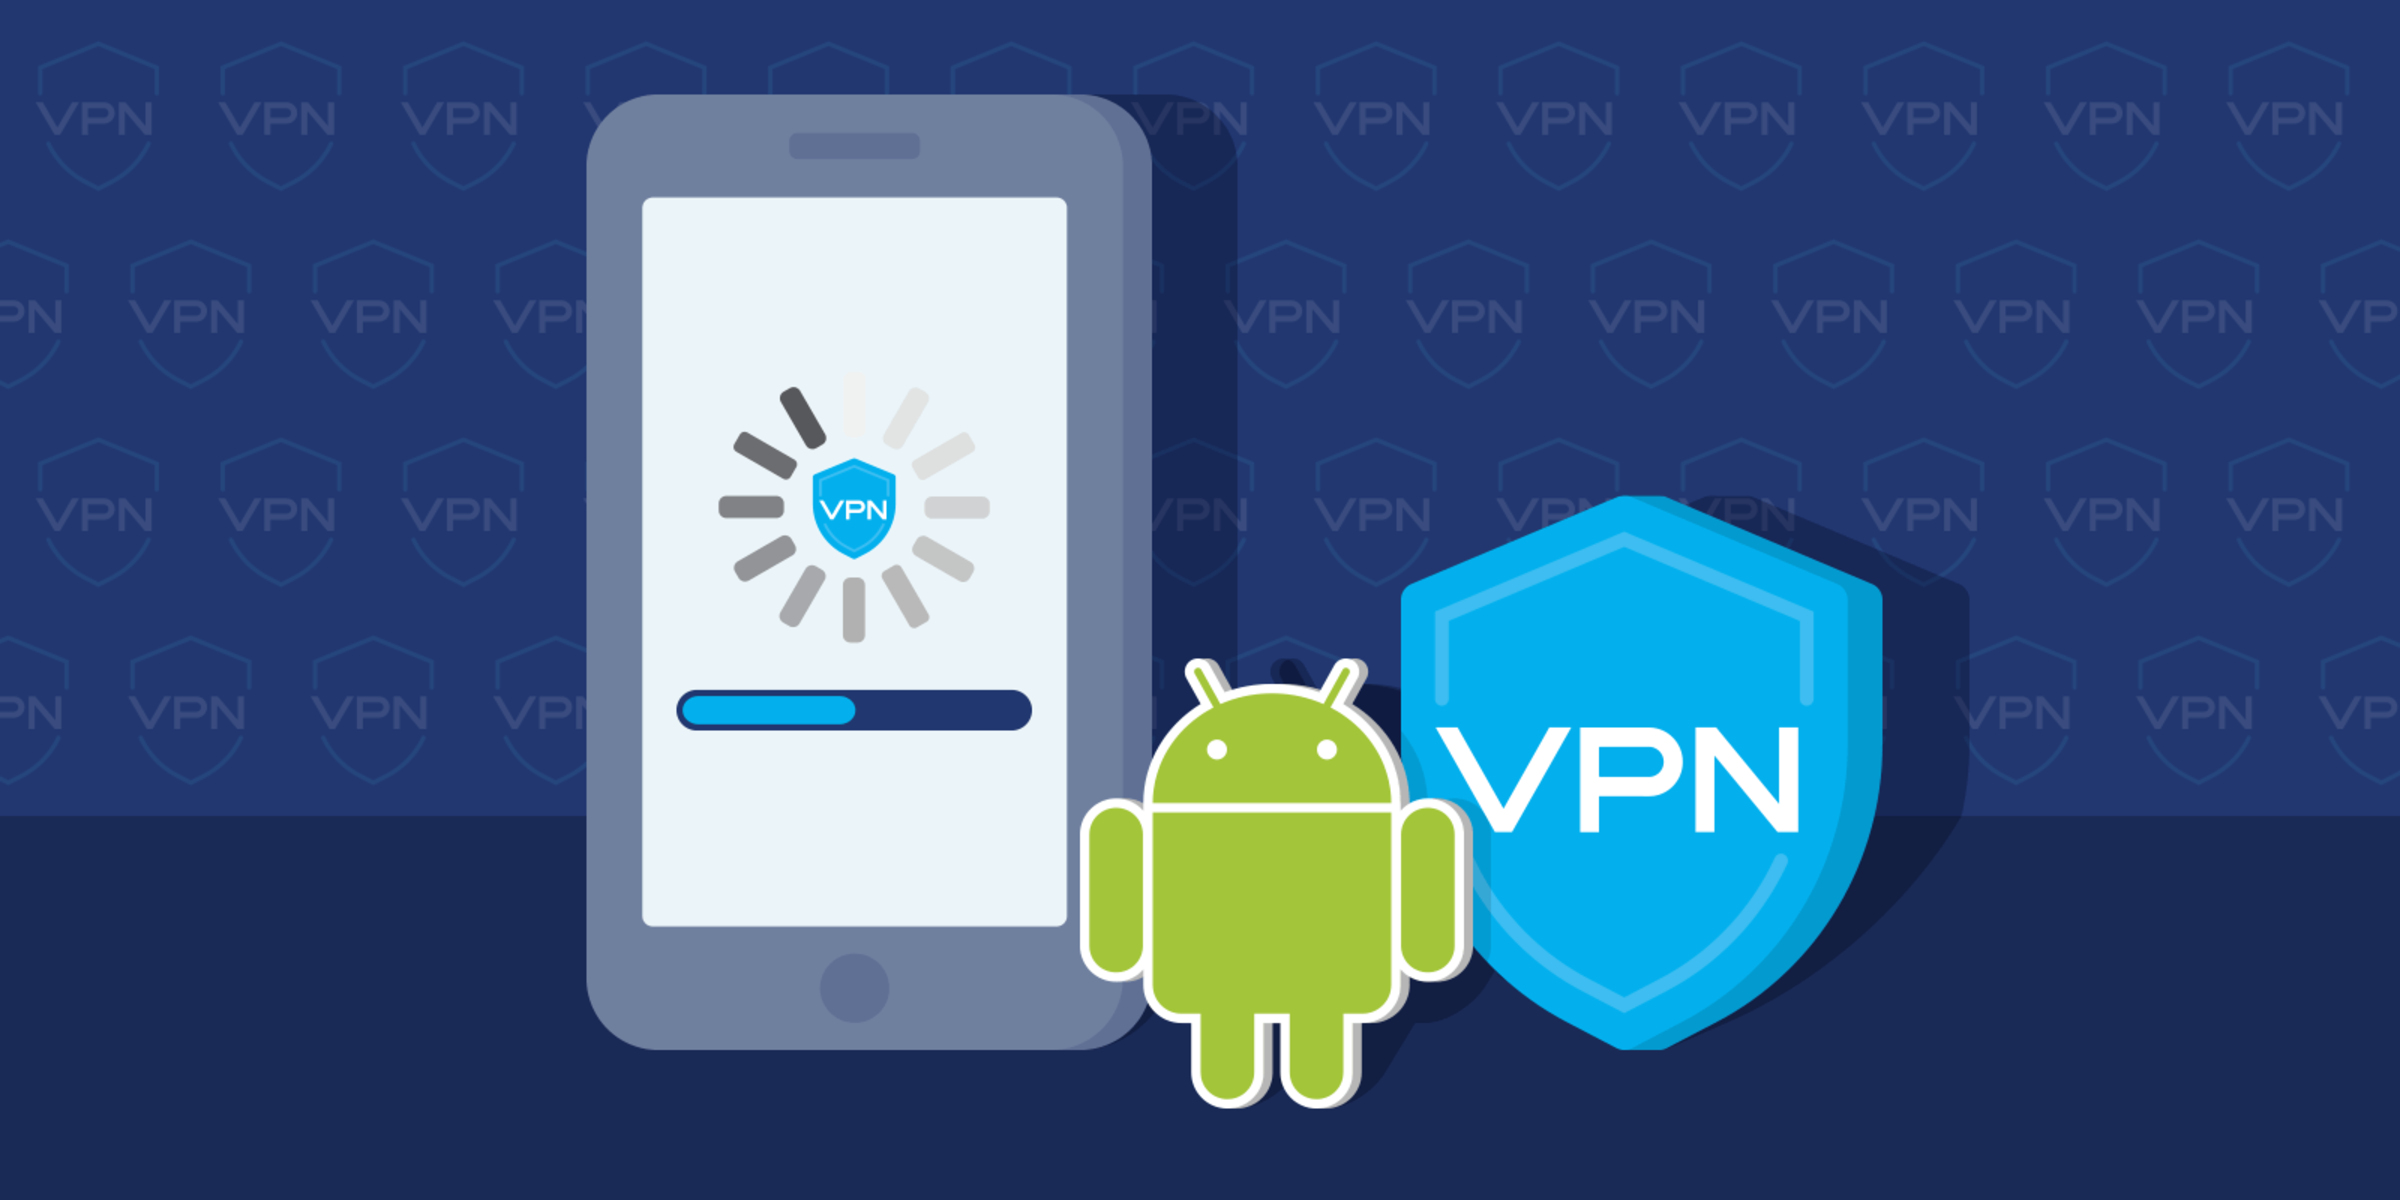 How To Get VPN On Android